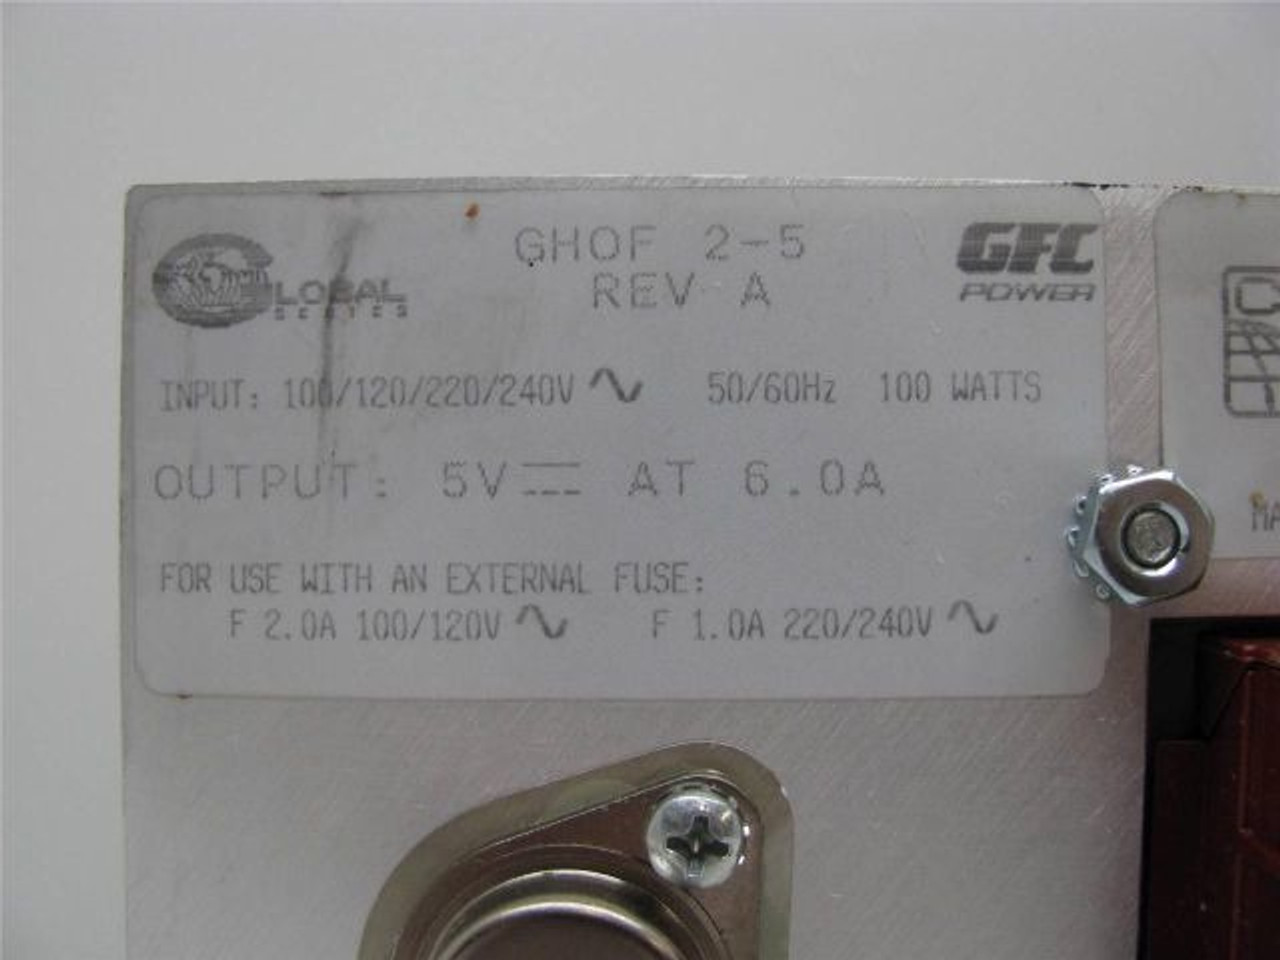 GFC Power GHOF 2-5 Power Supply 5VDC Output 6 Amps Input 100-240VAC